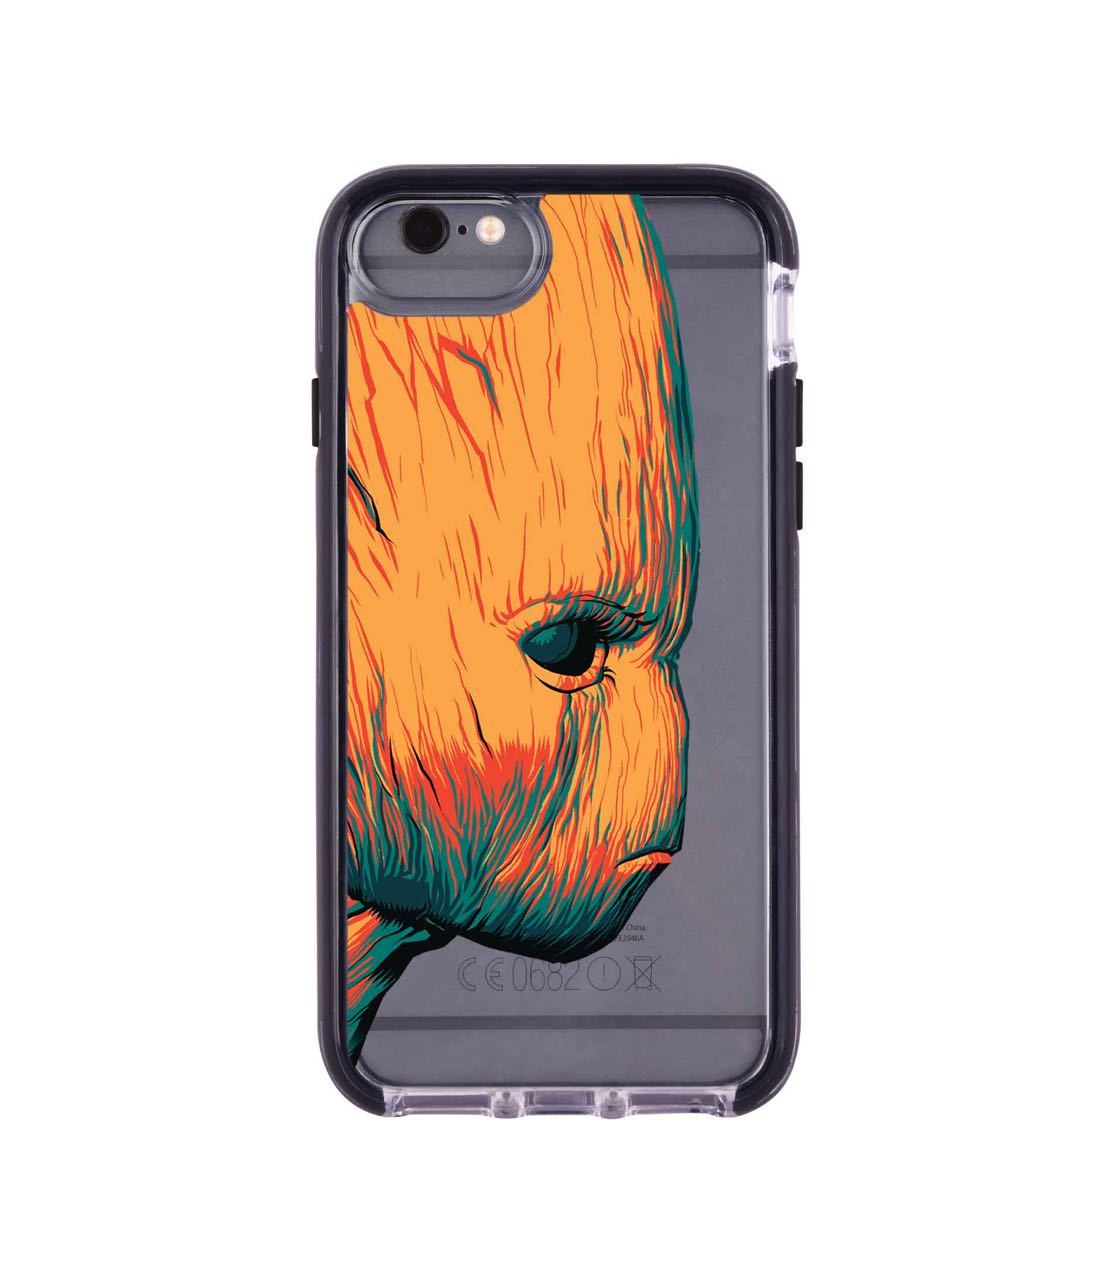 Illuminated Groot - Extreme Phone Case for iPhone 6S